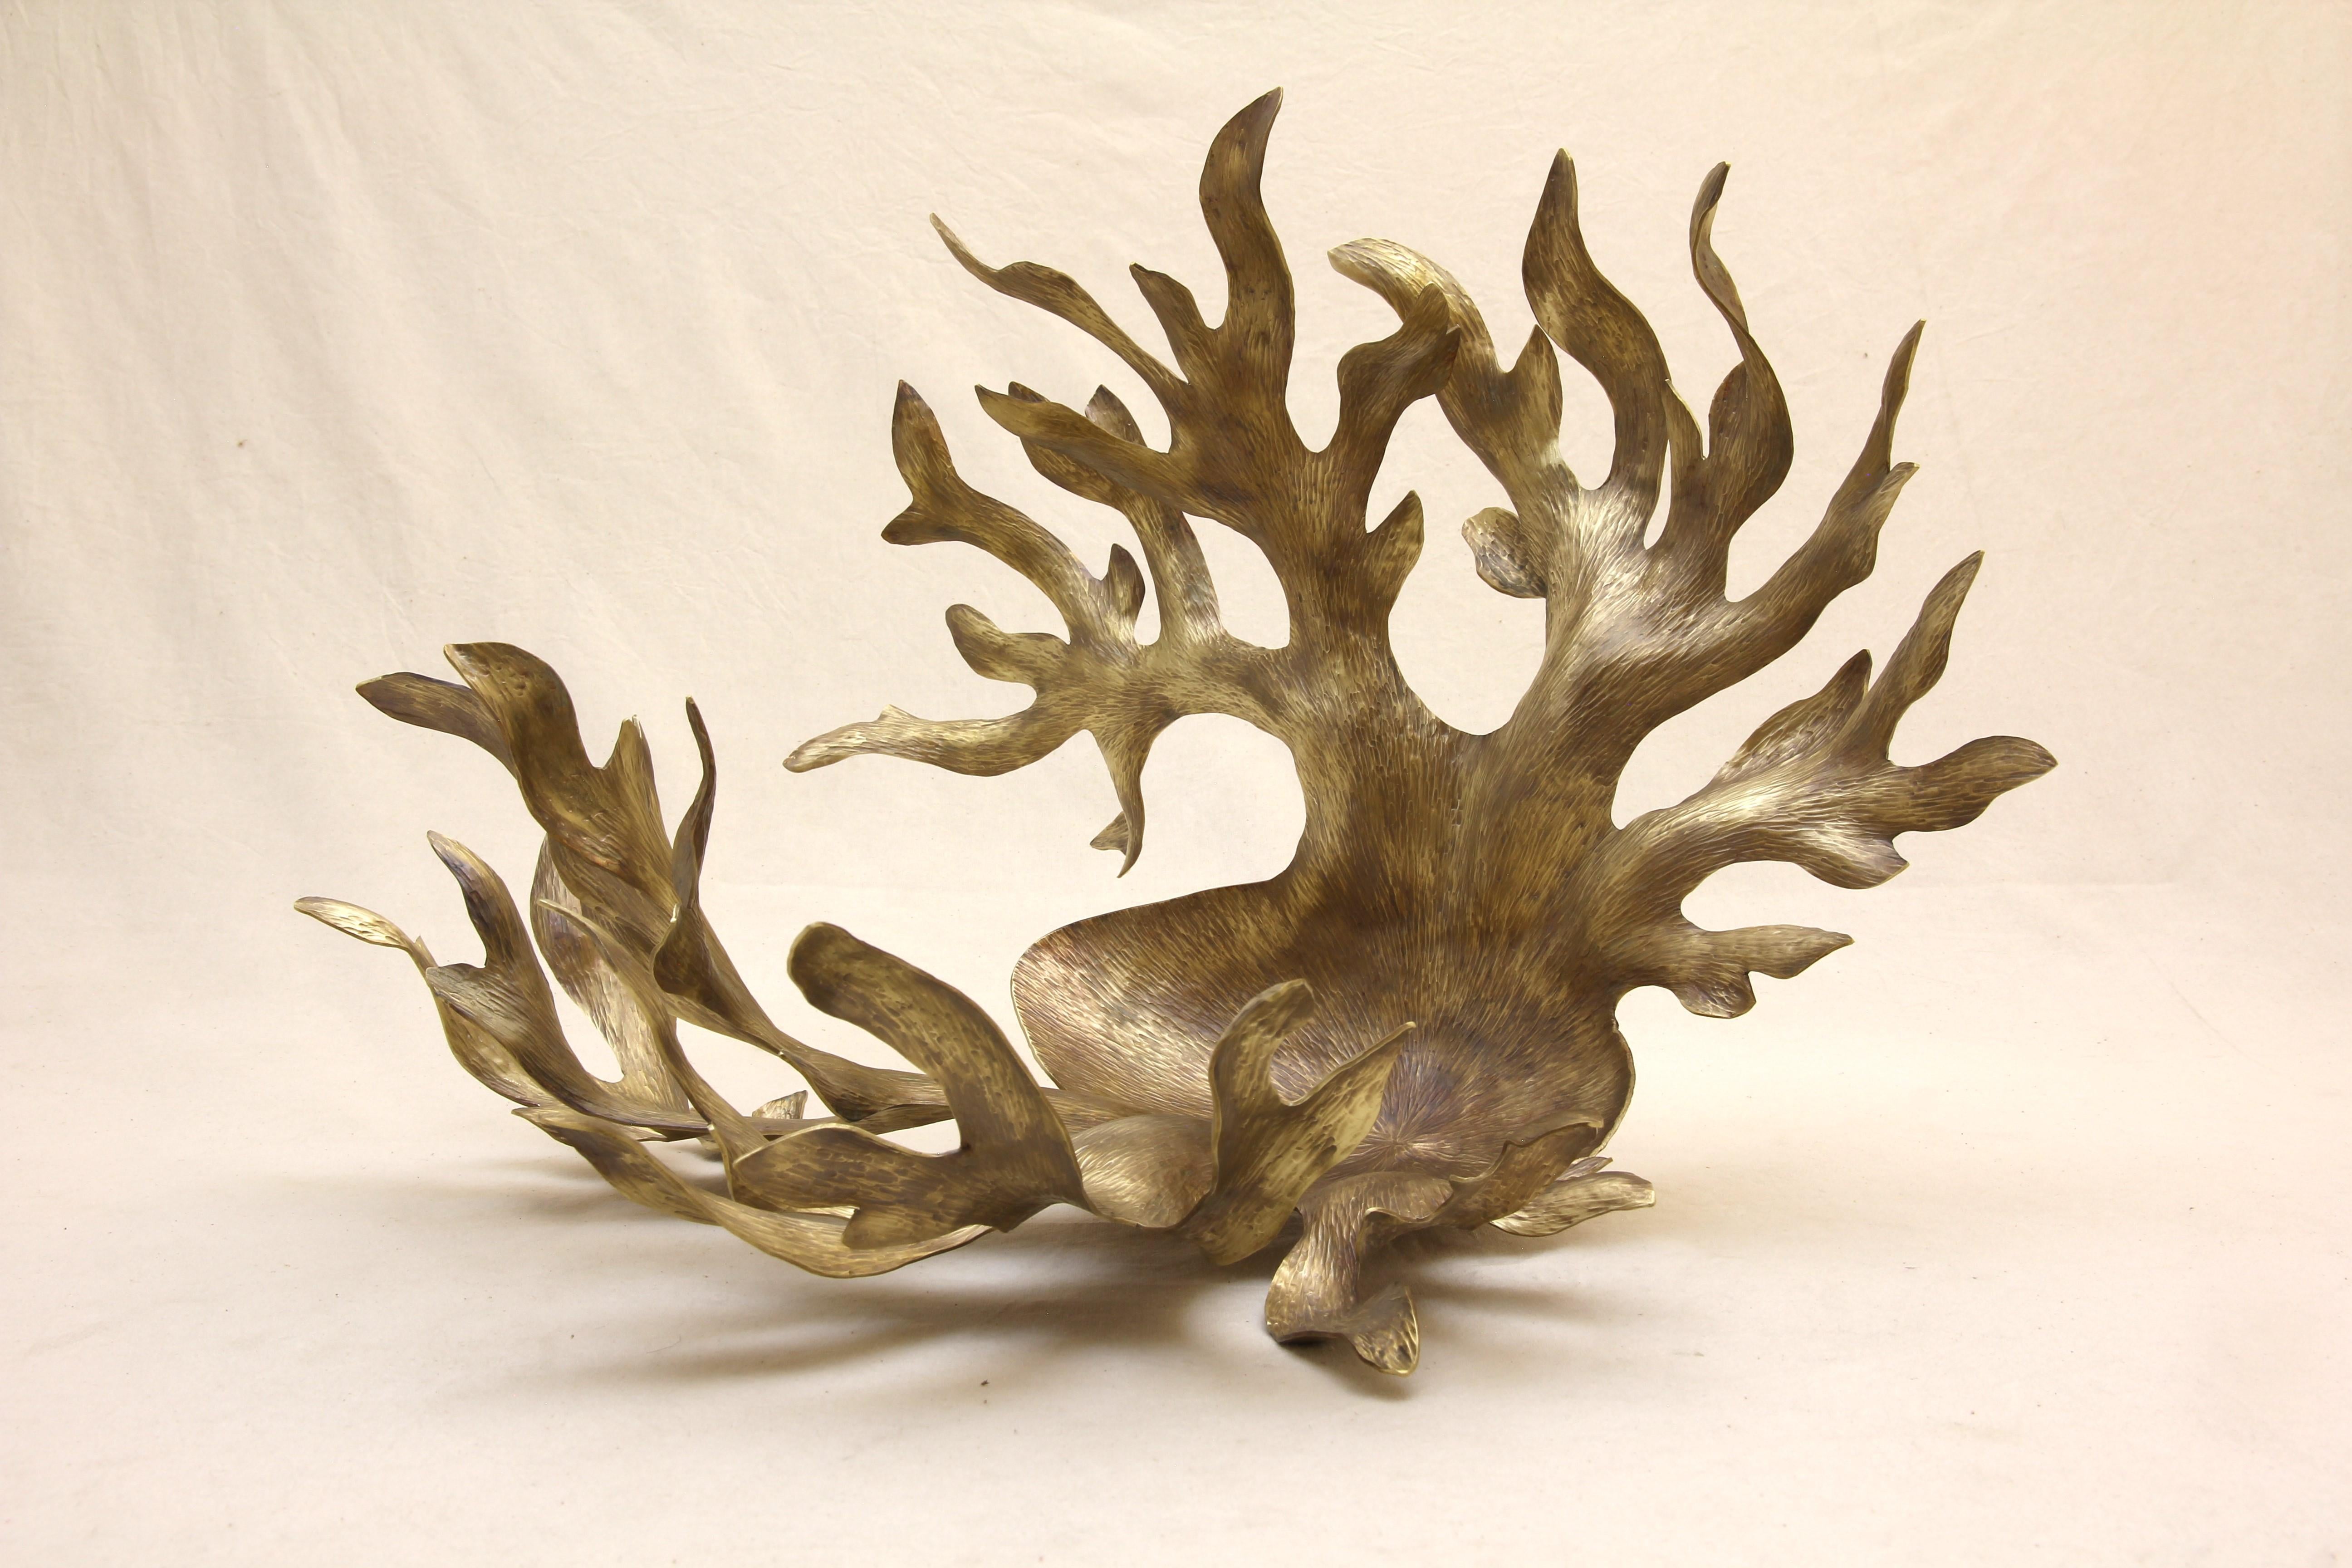 Inspired by the wonderful shapes of the majestic Elk antlers, this organic centerpiece is made out of aged Tumbaga.
100% hand made by expert craftsmen, each sheet of metal is hand hammered, cut and twisted using metal and wood as a last to give each